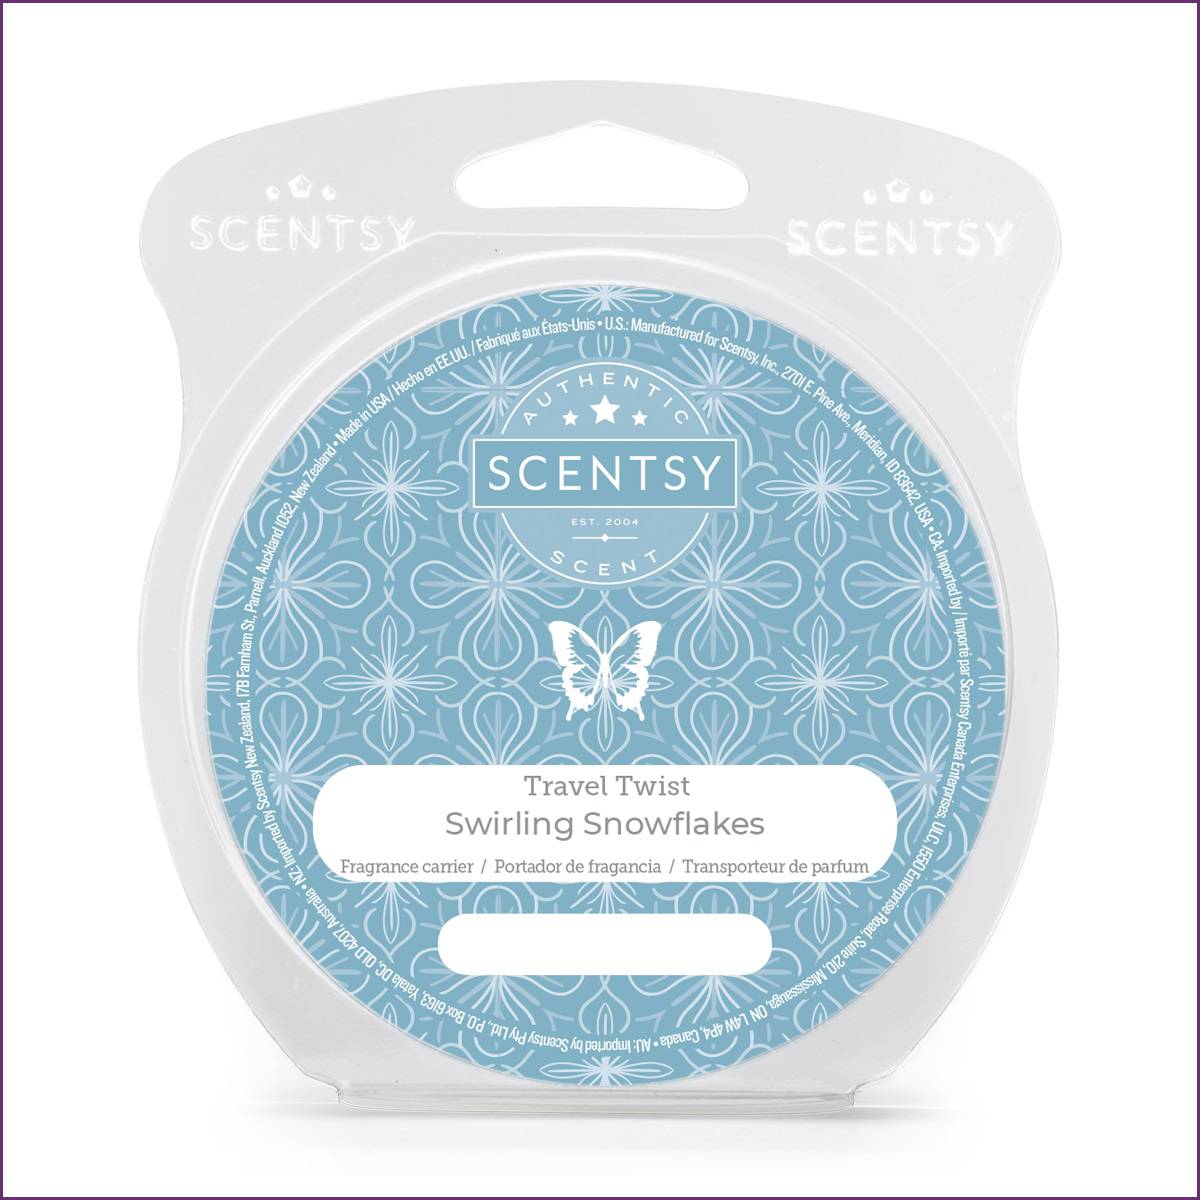 Swirling Snowflakes Scentsy Travel Twist